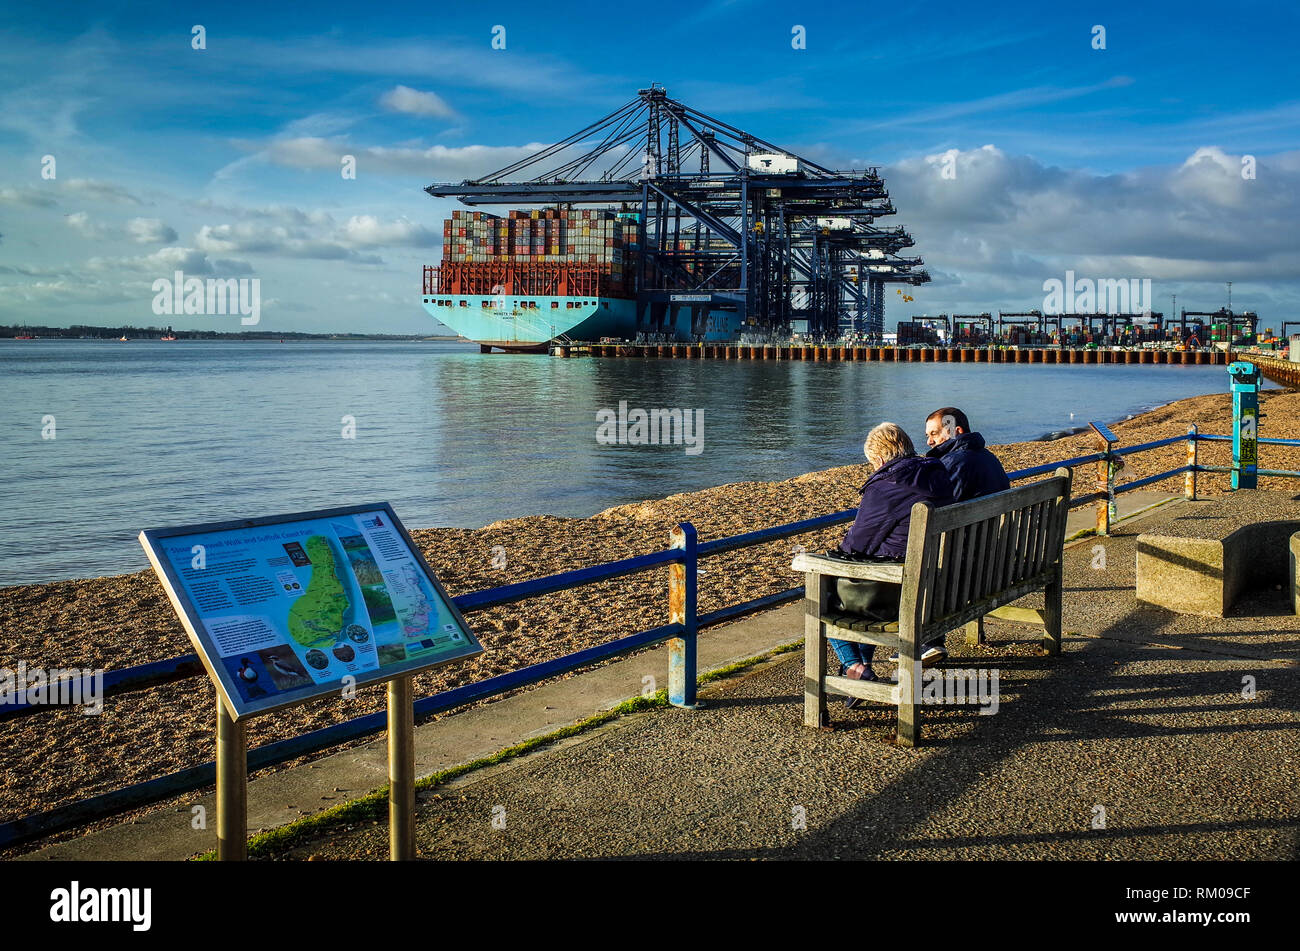 Port of Felixstowe - two people watch shipping containers being loaded and unloaded onto ships at Felixstowe Port, the UK's largest container port. Stock Photo